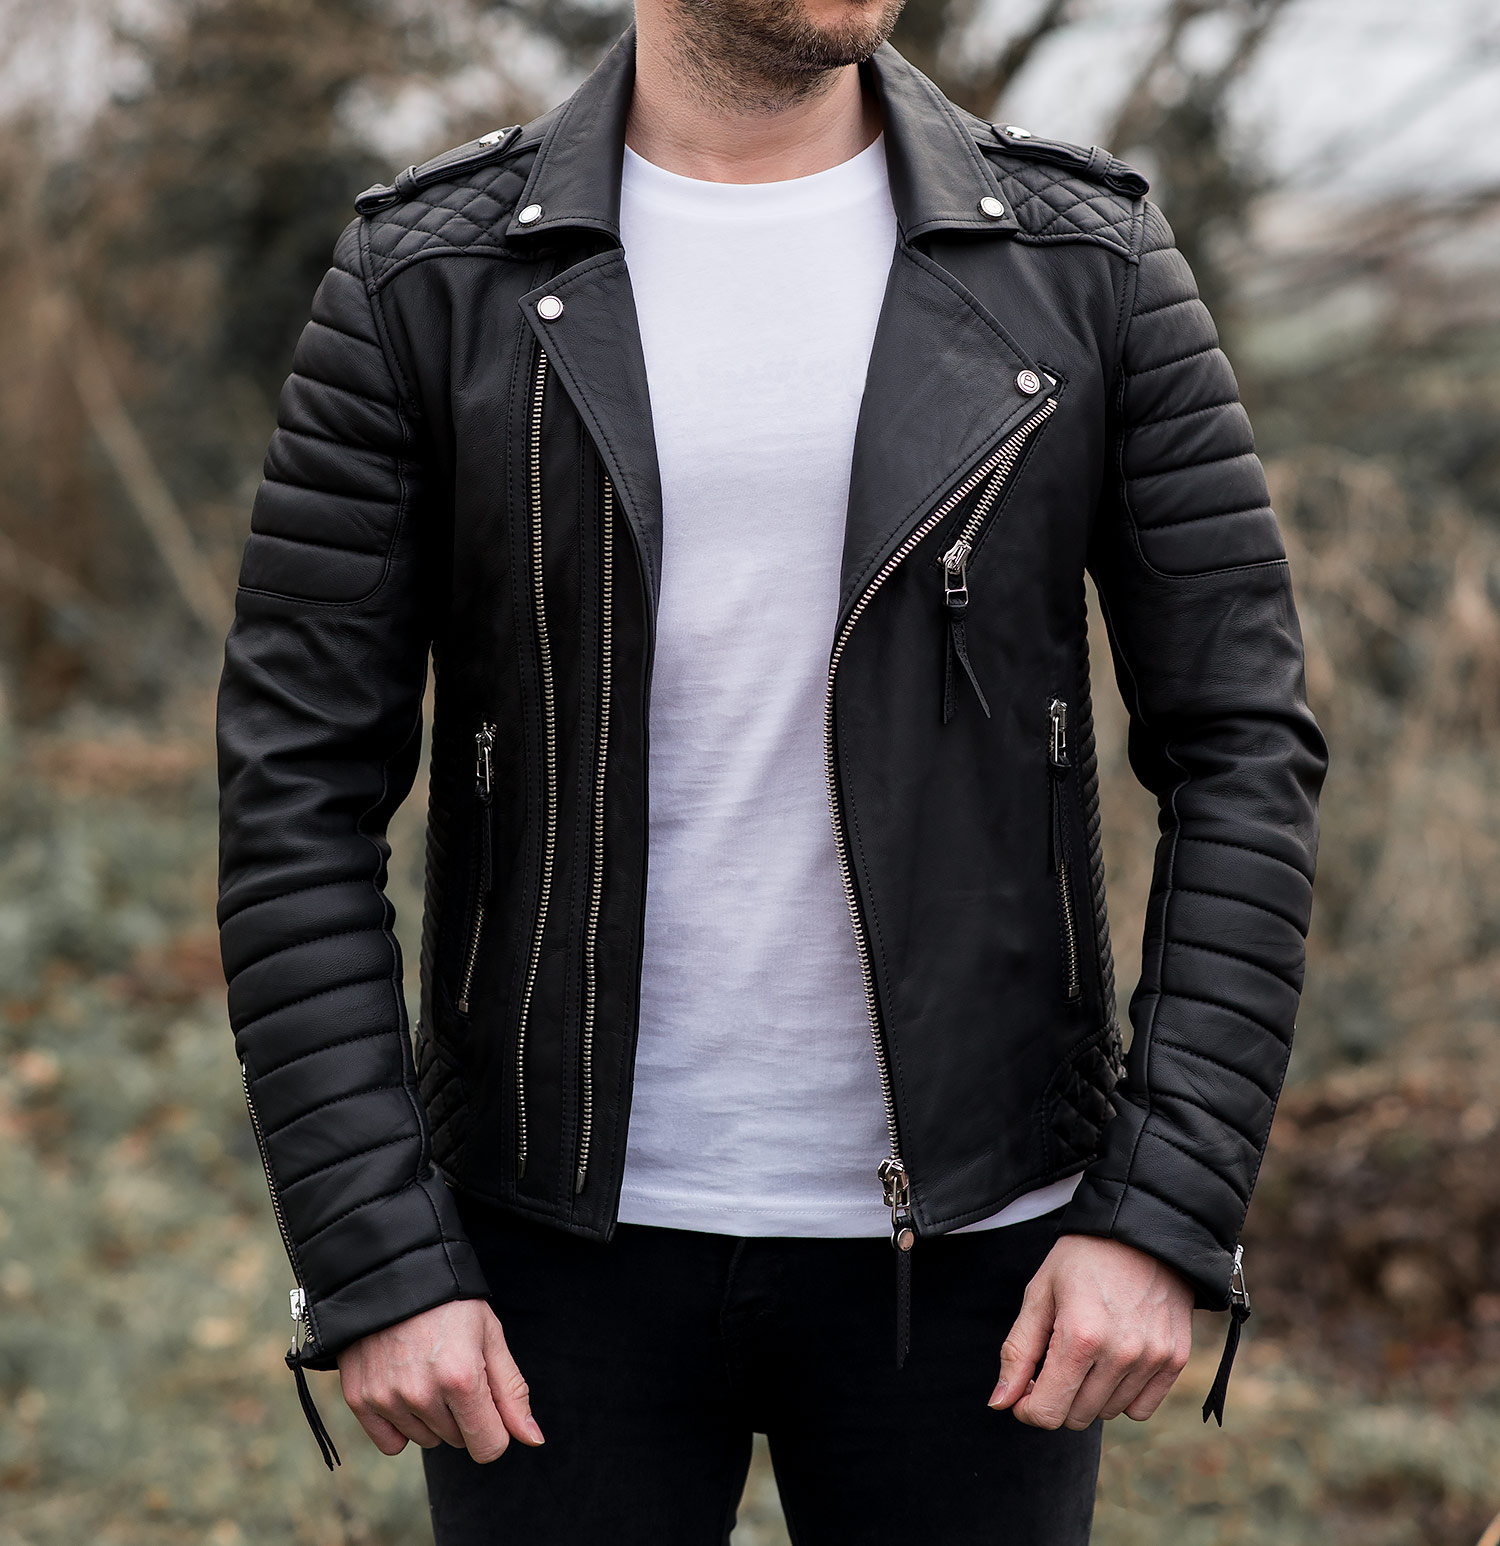 Boda Skins Kay Michaels Men’s Leather Jacket Review - Your Average Guy